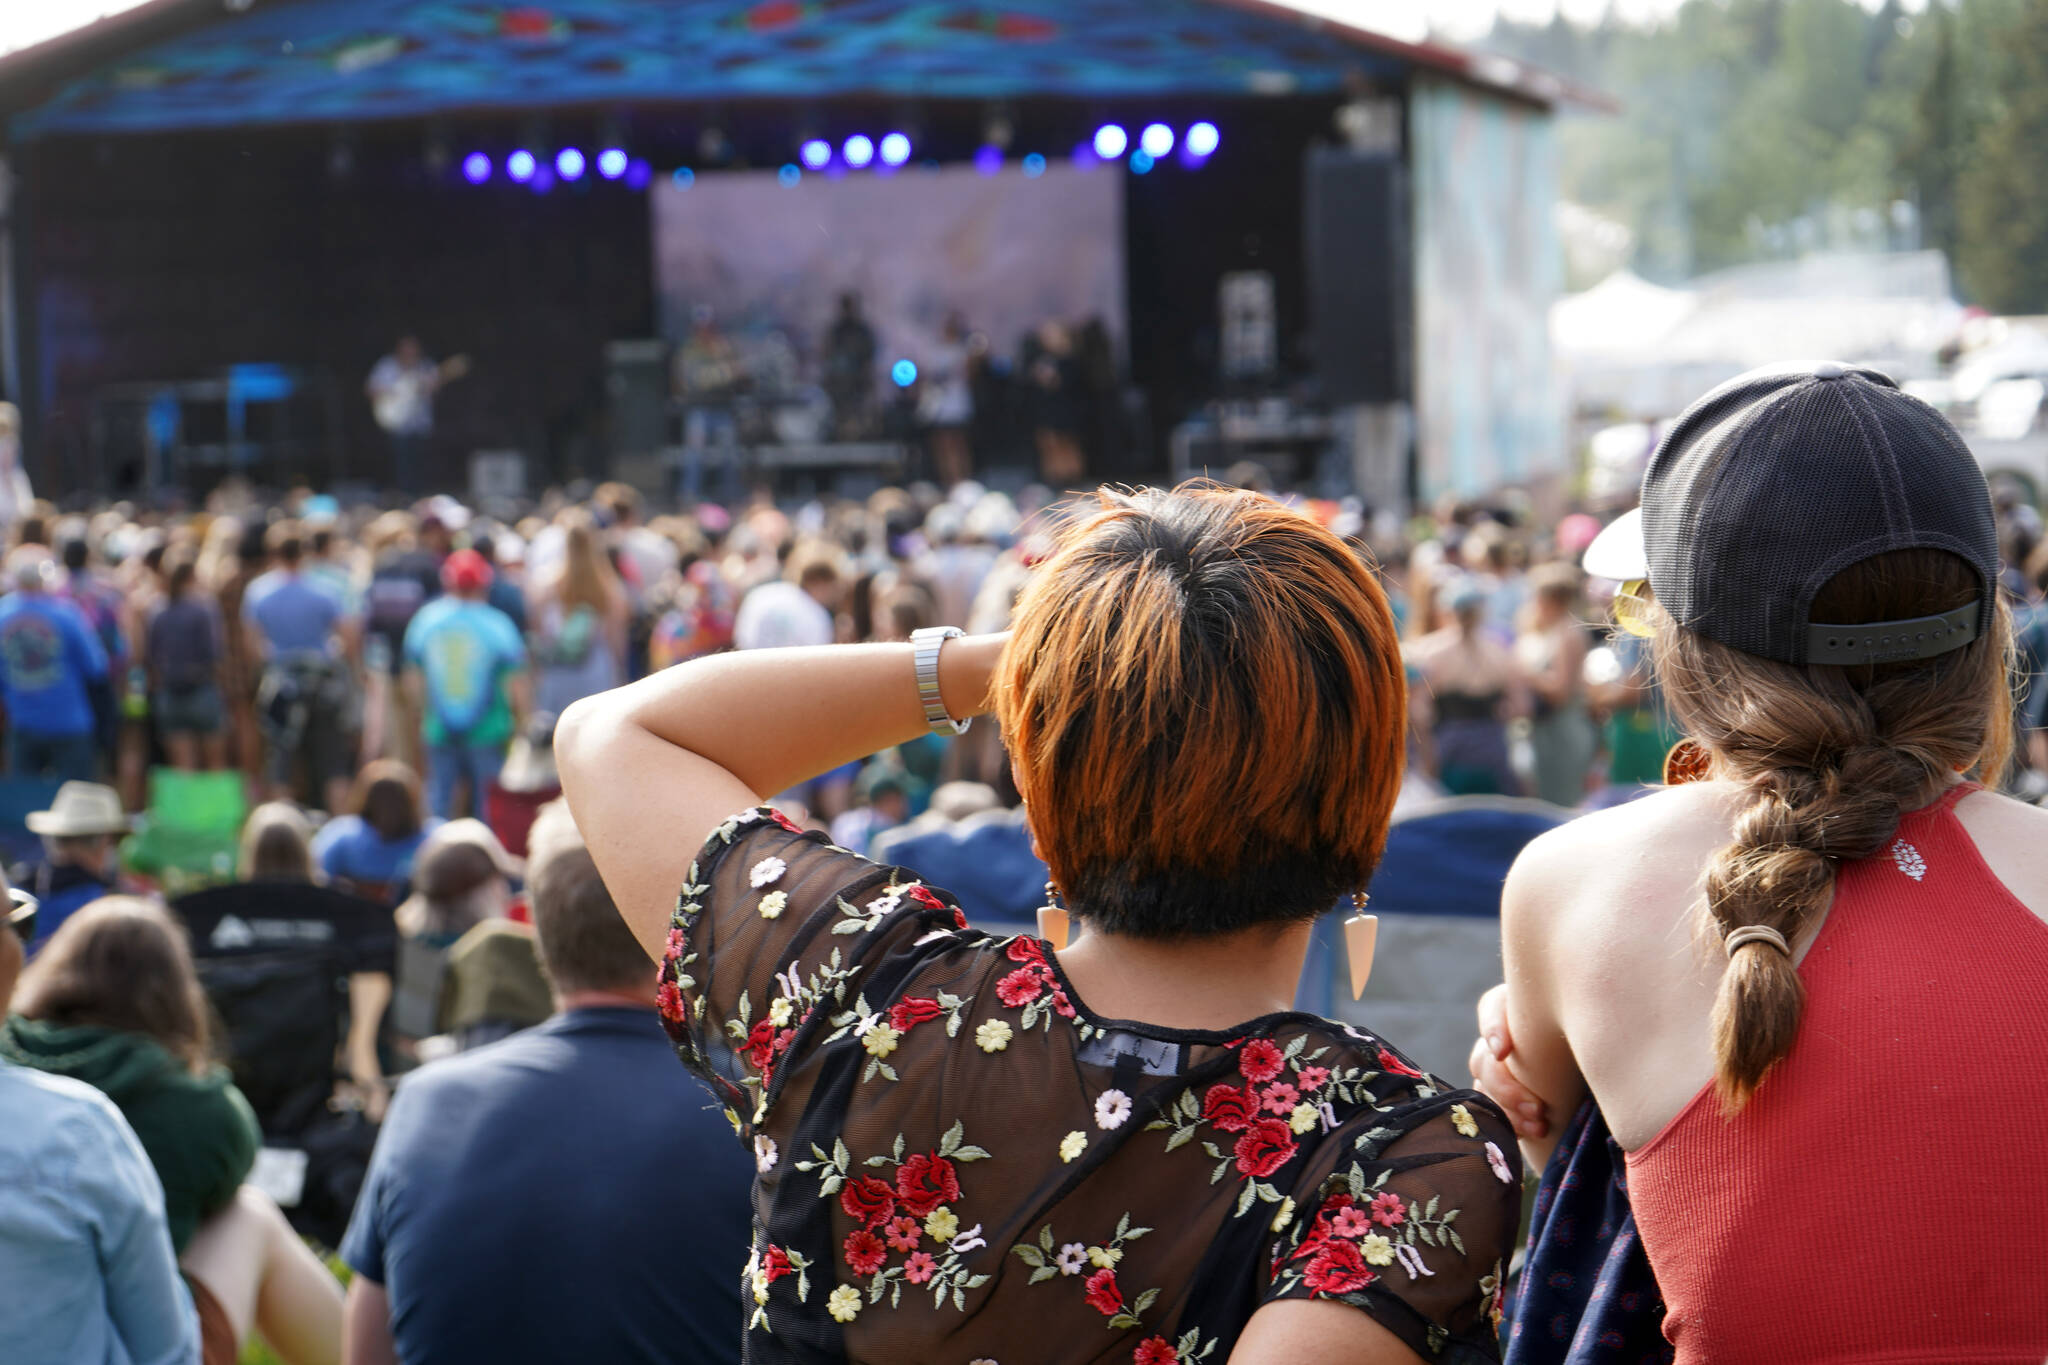 Attendees view a performance by Medium Build on the River Stage at Salmonfest in Ninilchik, Alaska, on Friday, Aug. 4, 2023. (Jake Dye/Peninsula Clarion)